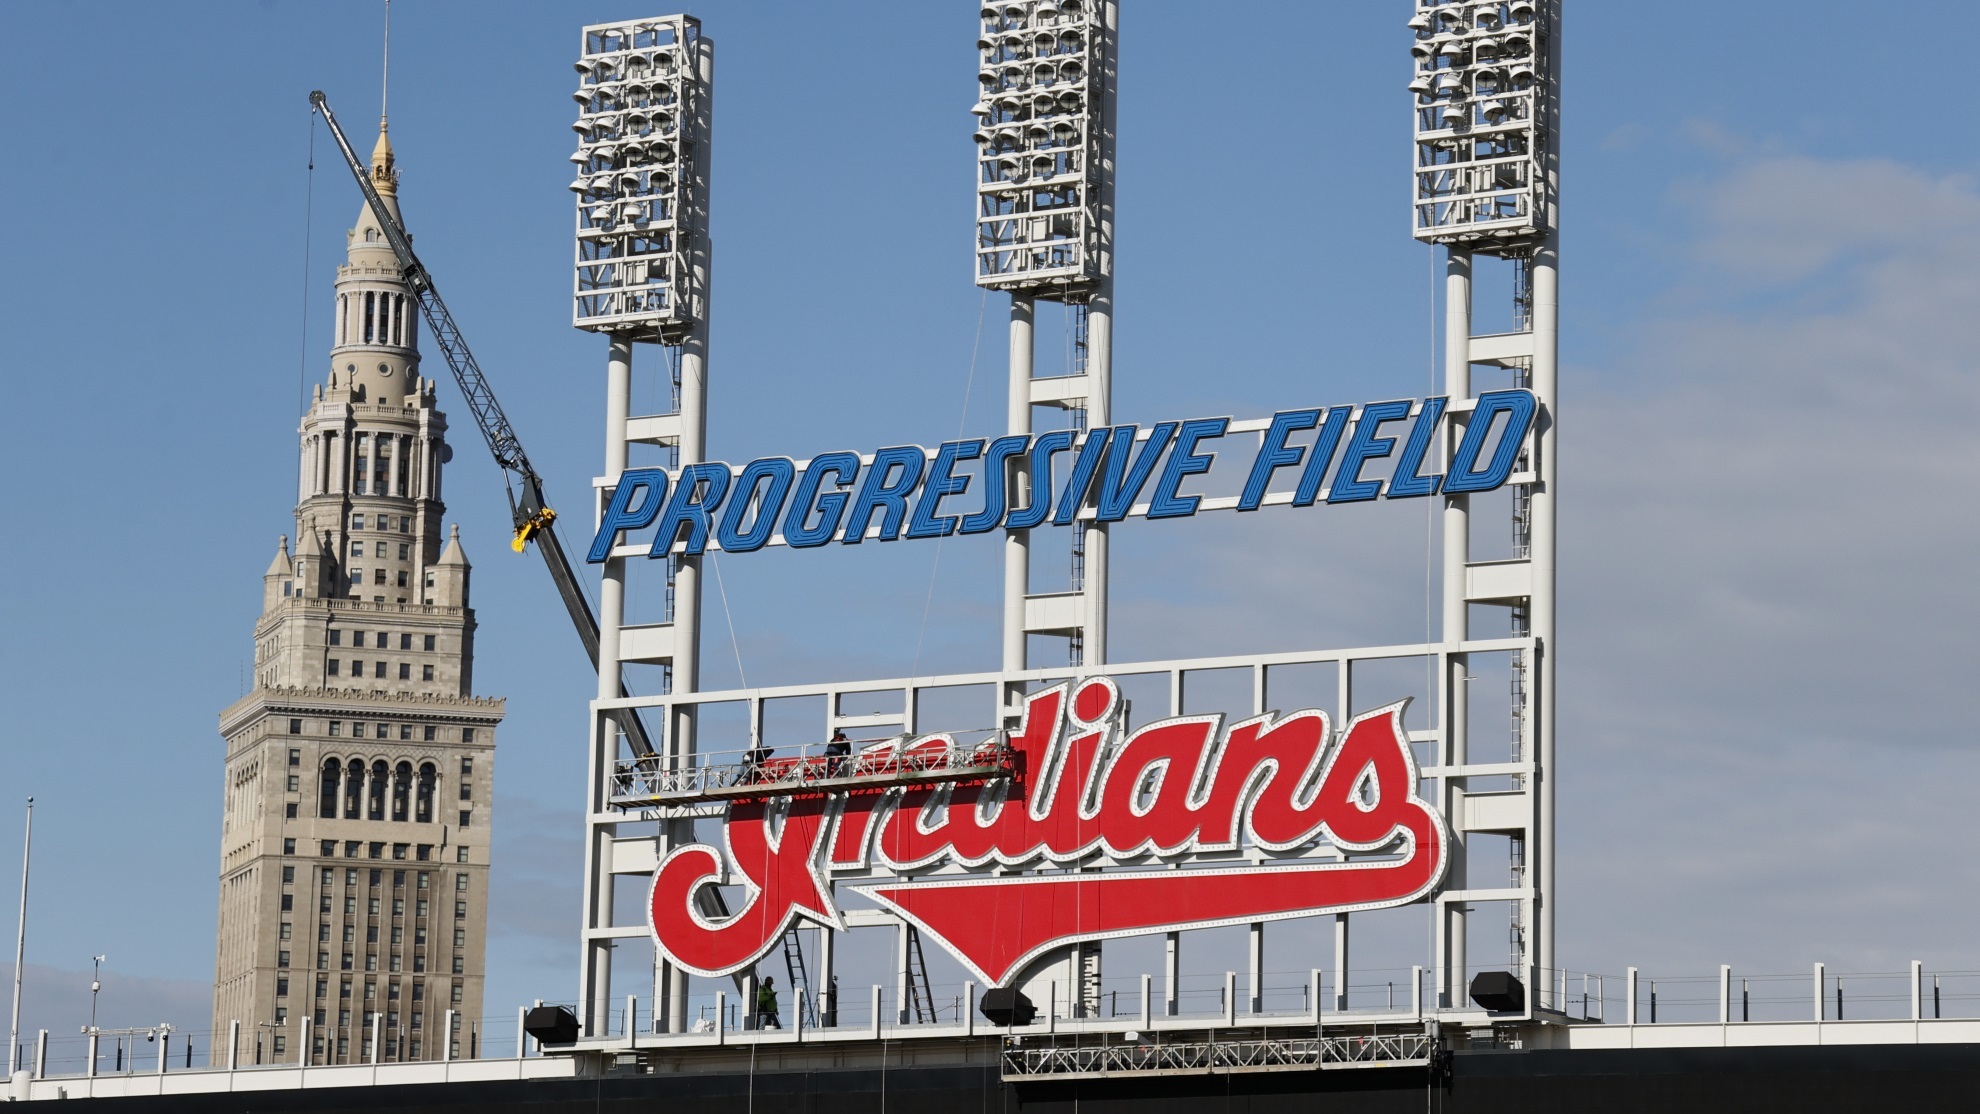 Workers begin to remove the Cleveland Indians sign from above the scoreboard at Progressive Field.